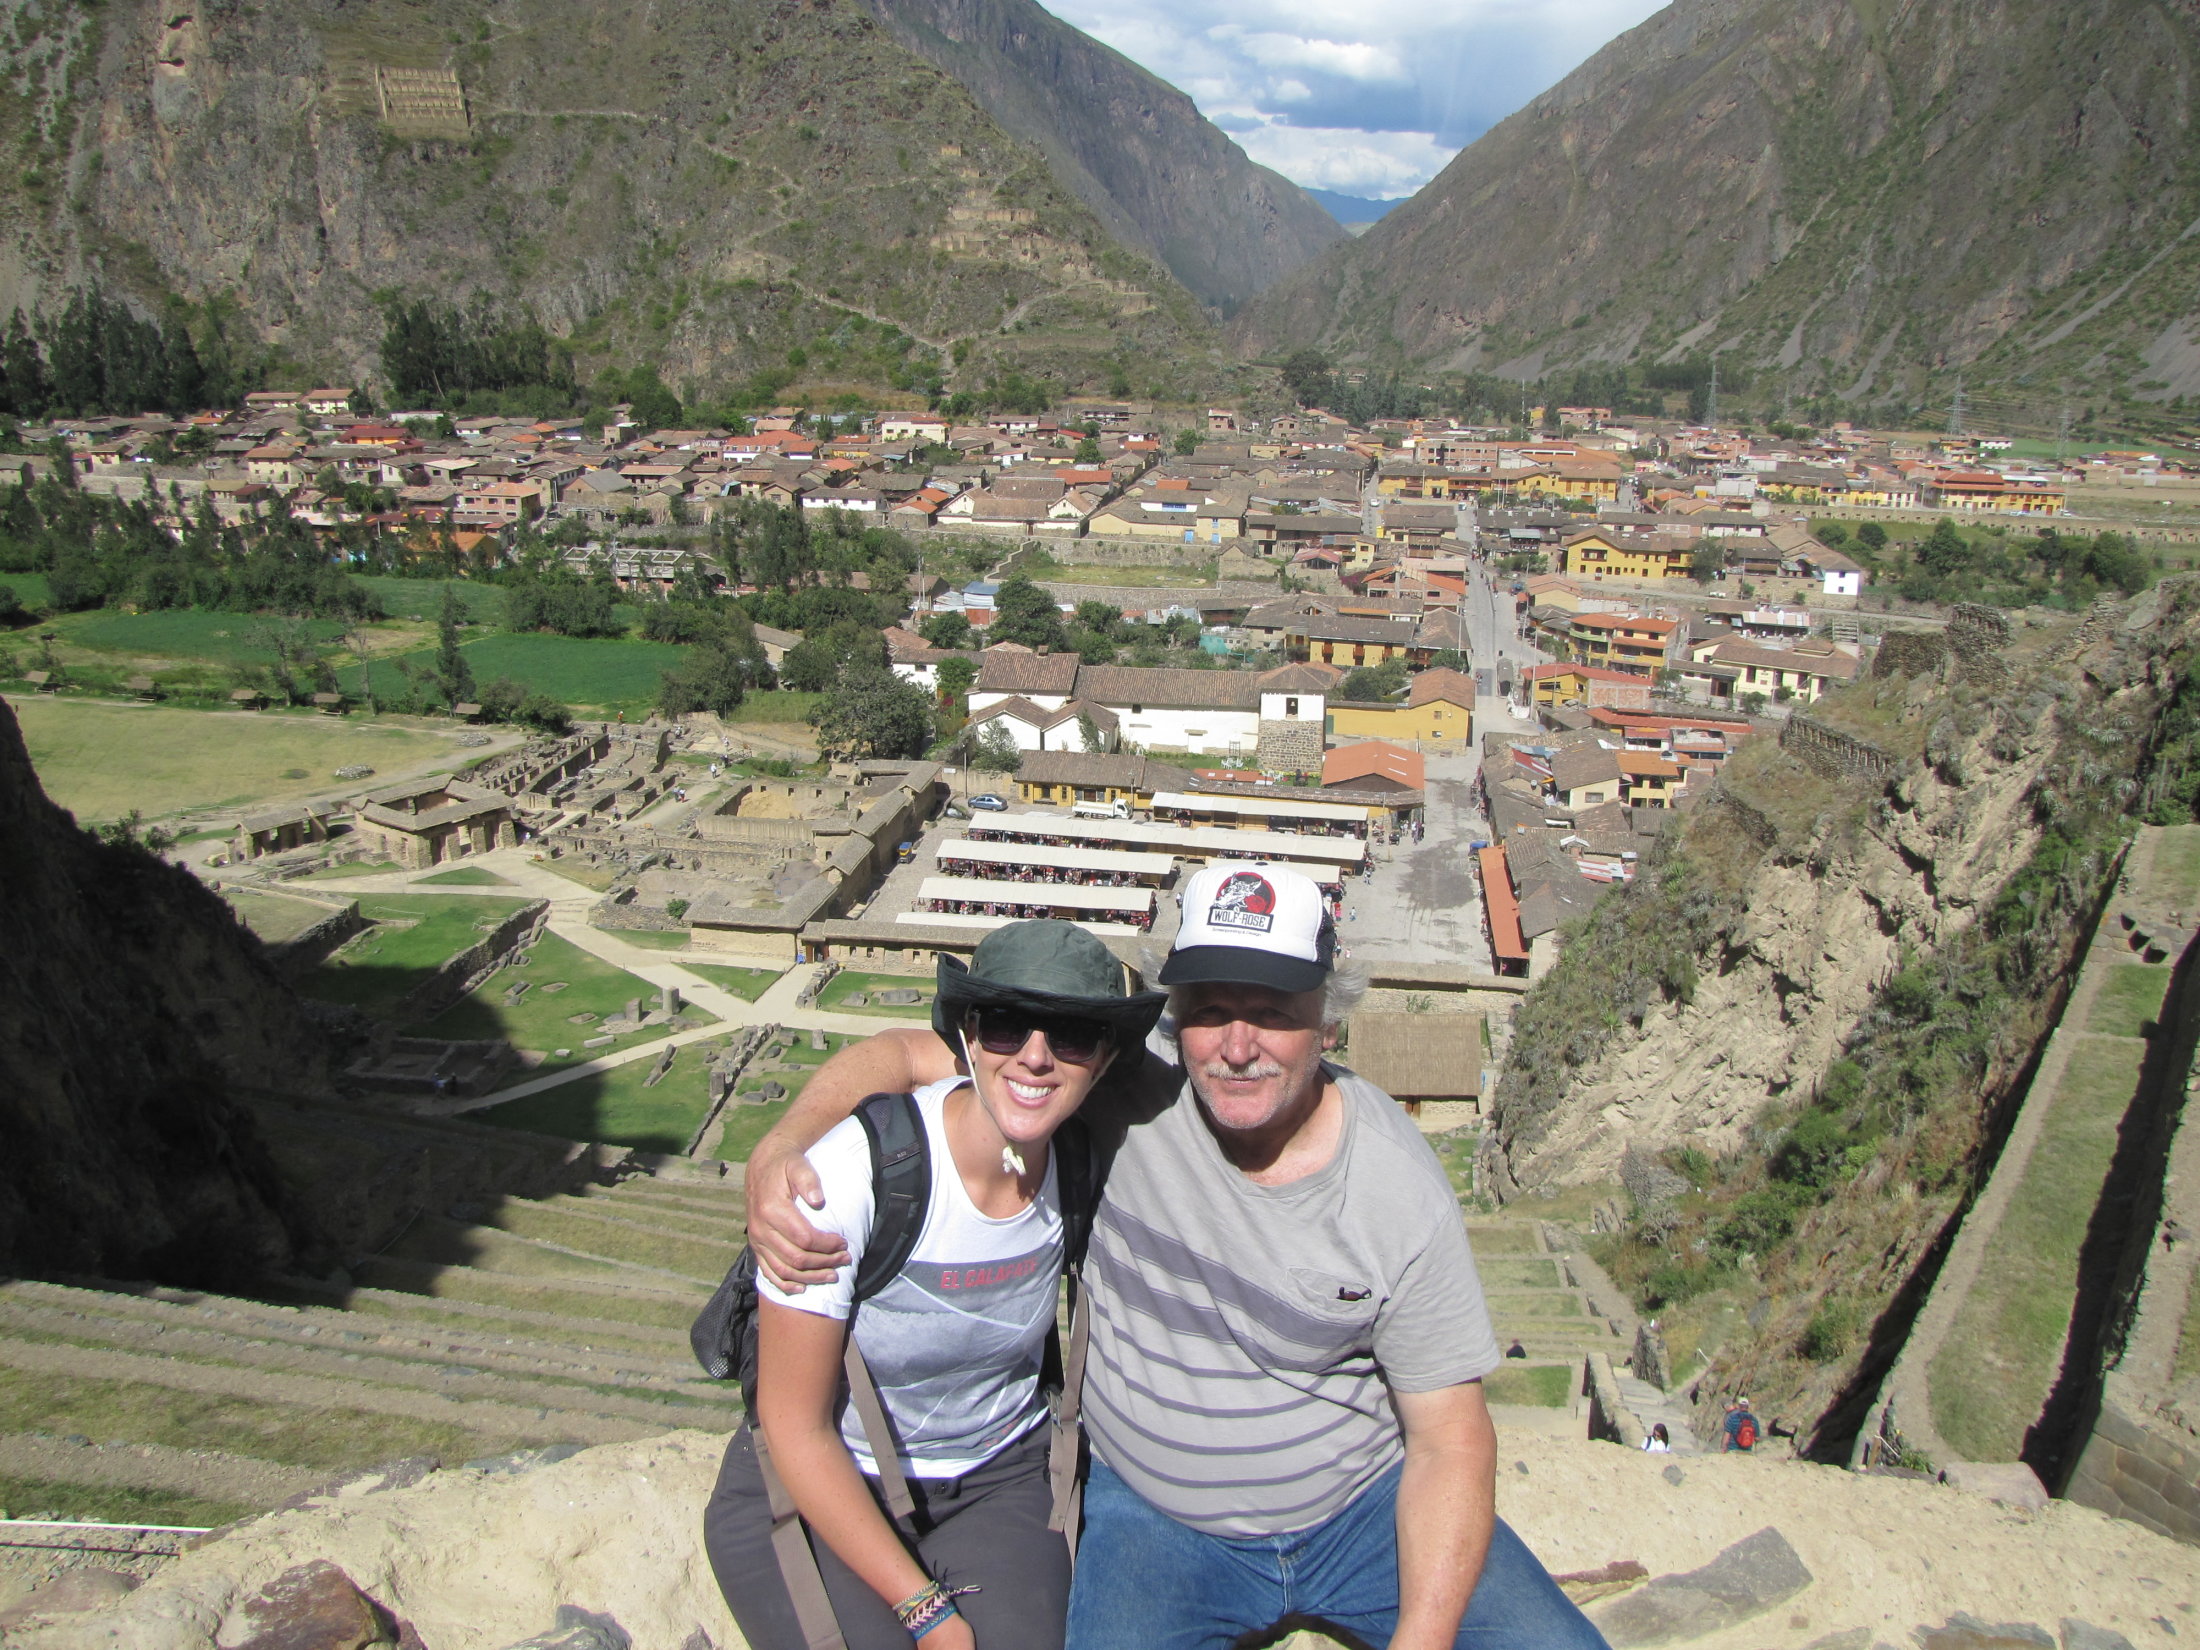 Shannon and her dad posing in front of Ollantaytambo